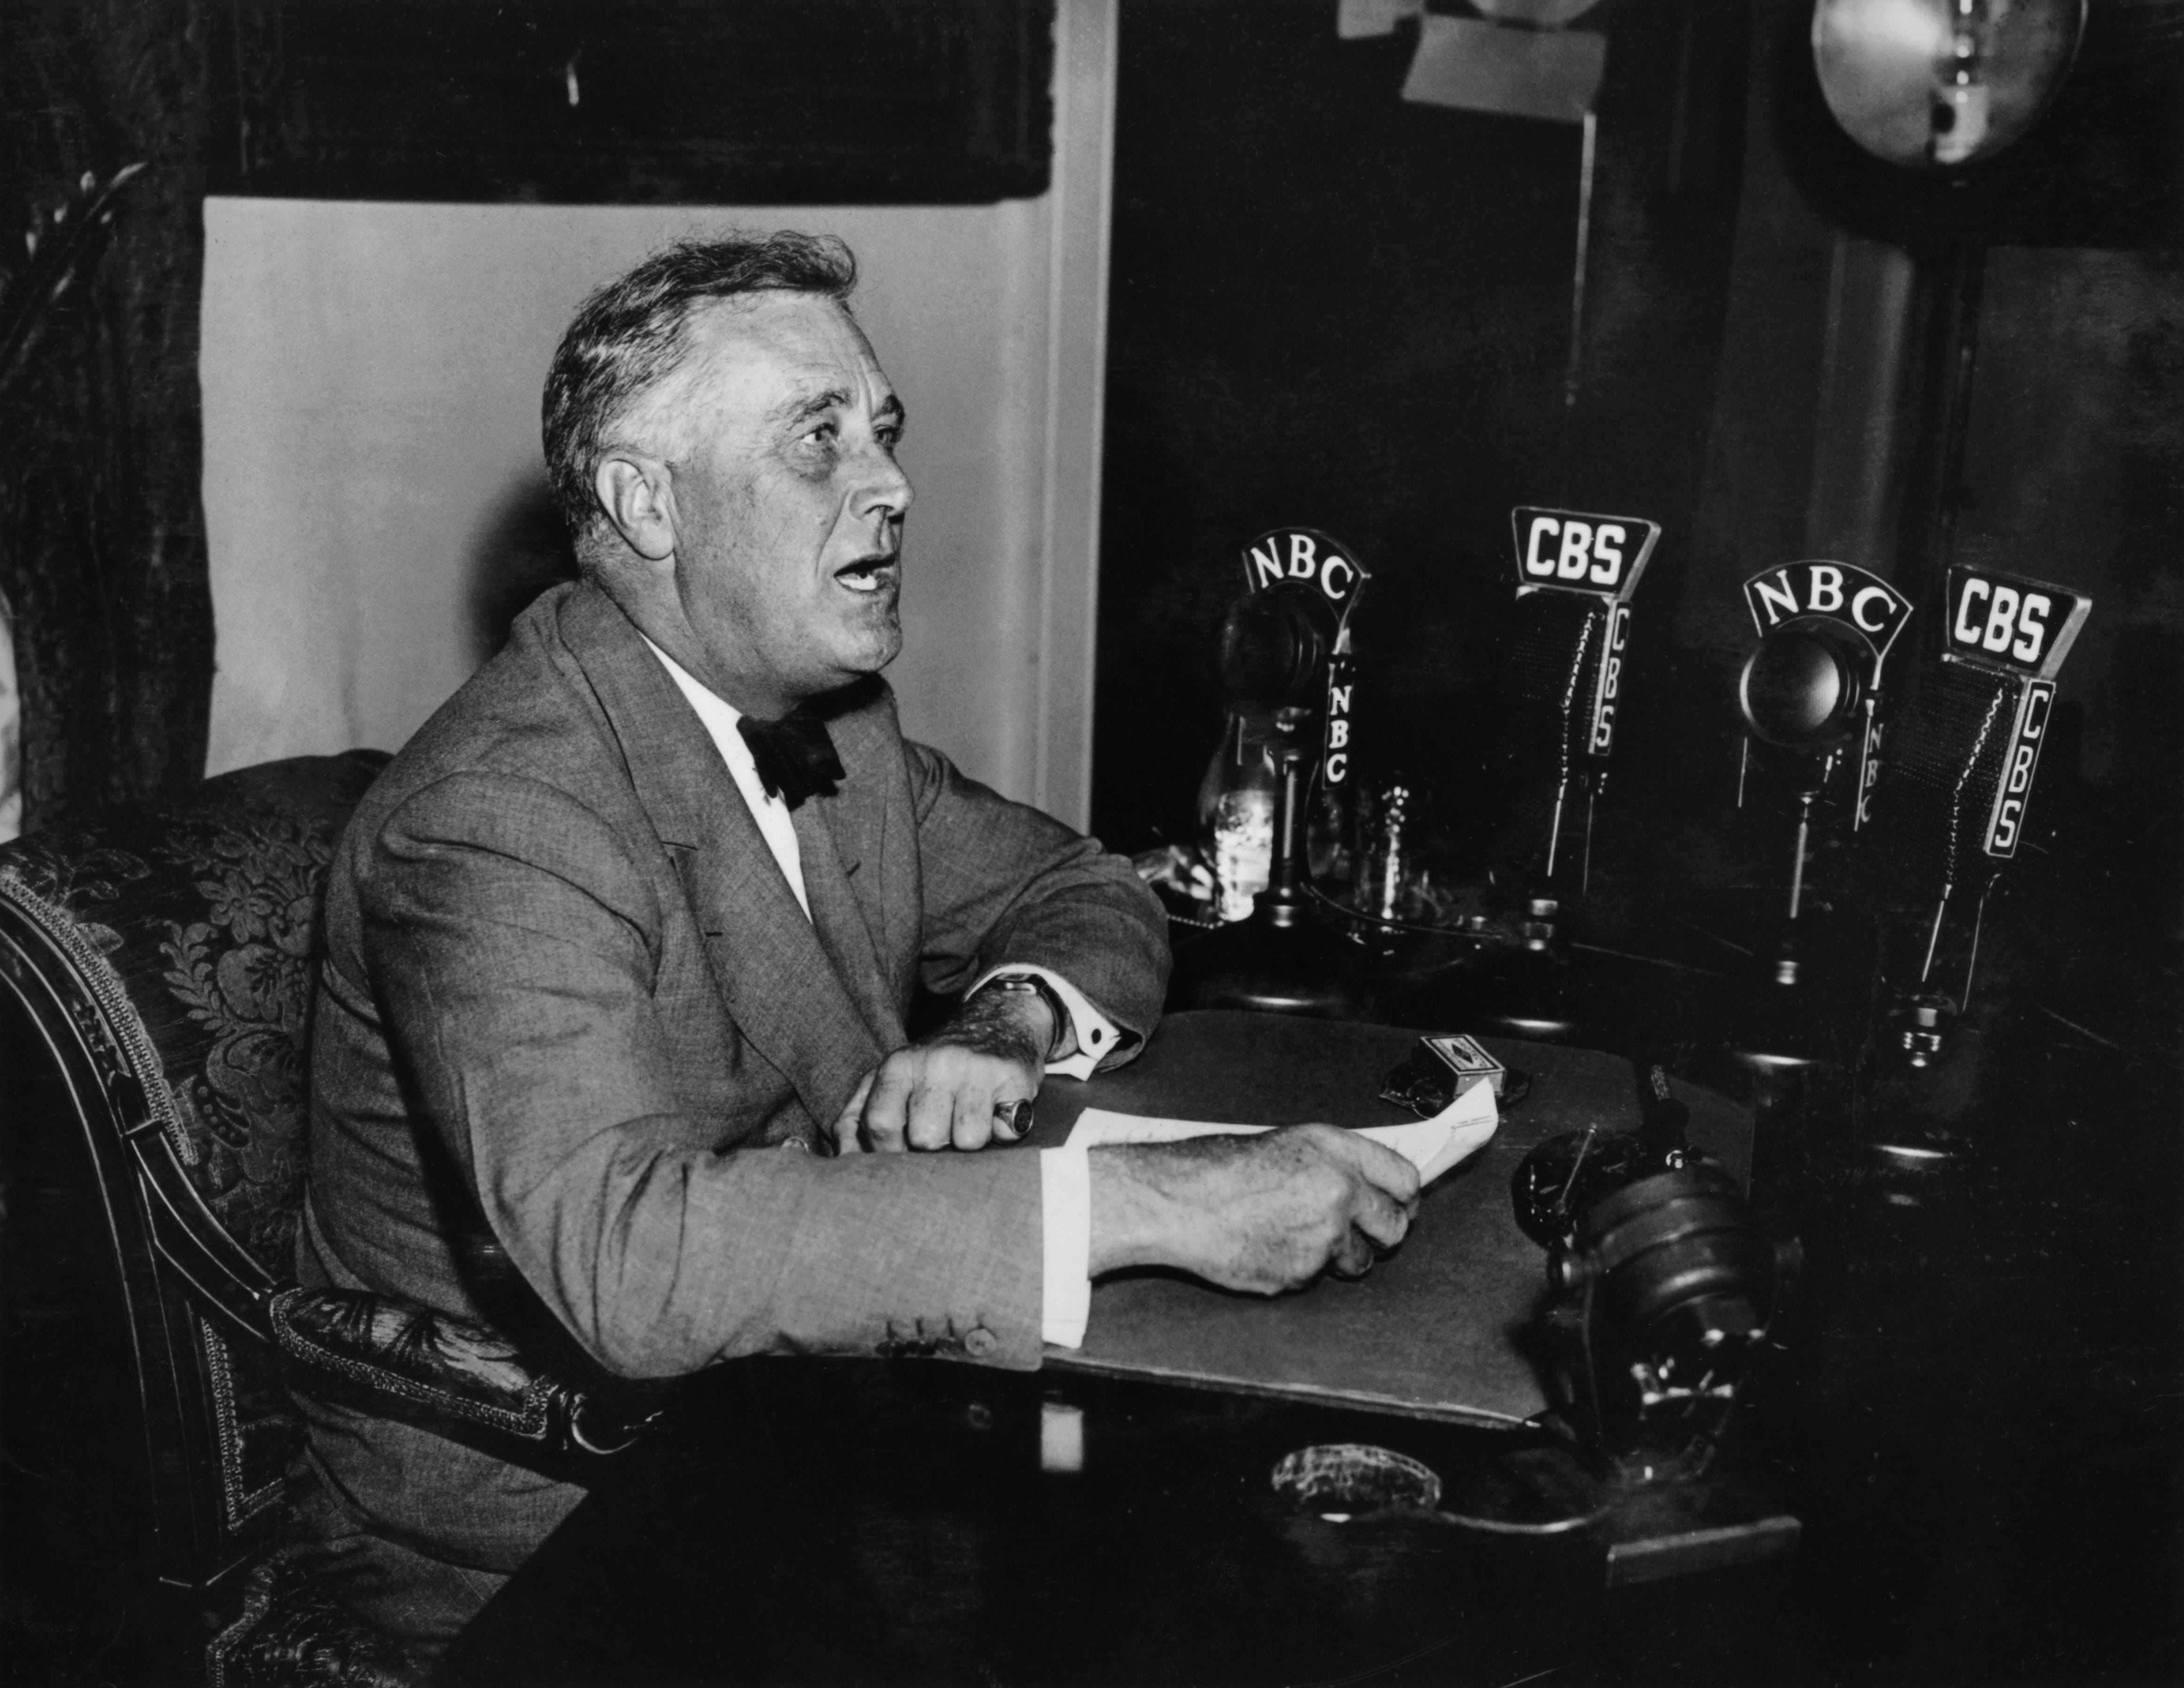 On this day in history, FDR's effort to pack the Supreme Court failed badly